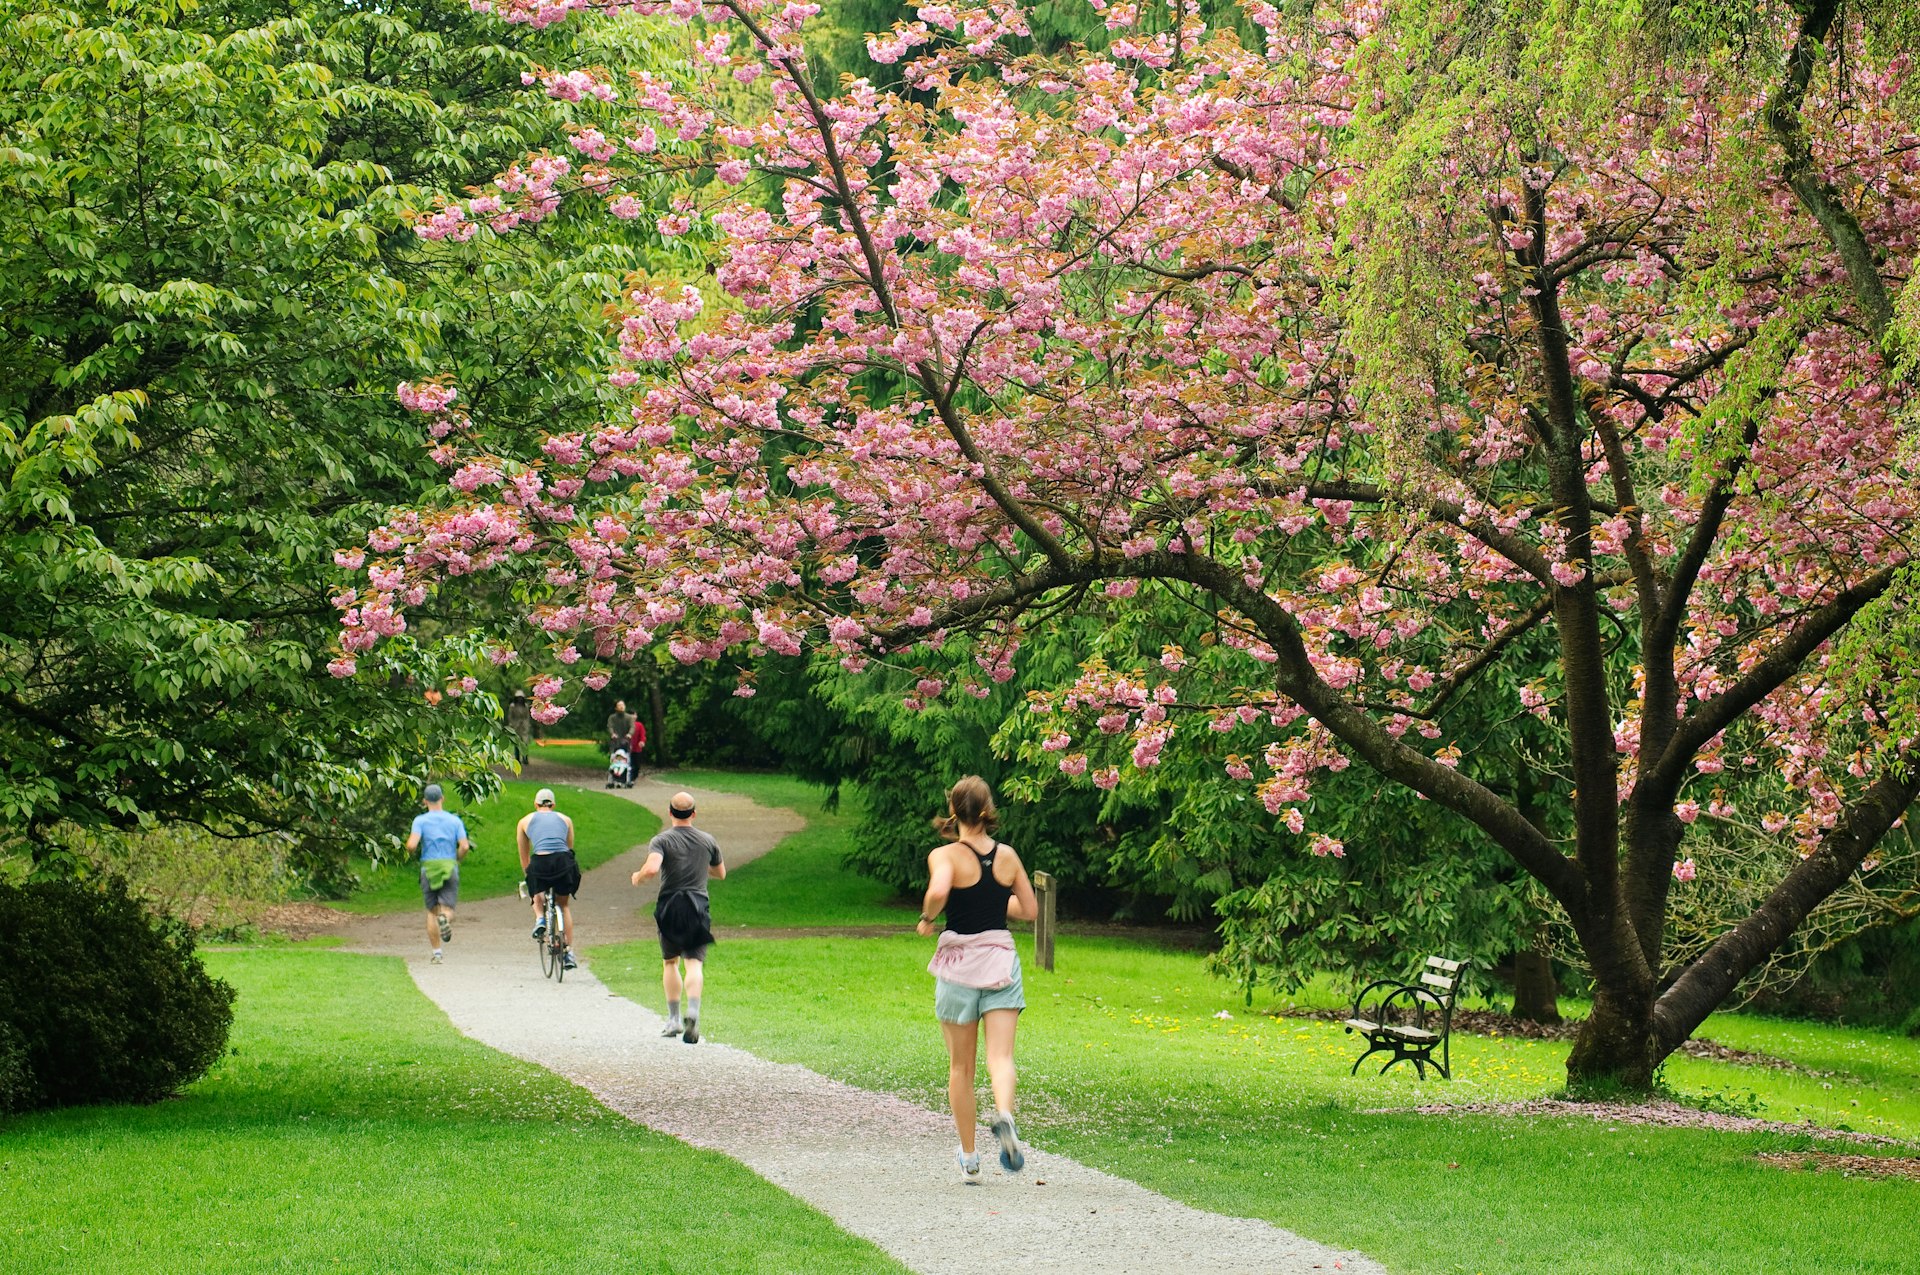 Cherry trees in bloom in a park as people jog, cycle and walk on footpath nearby